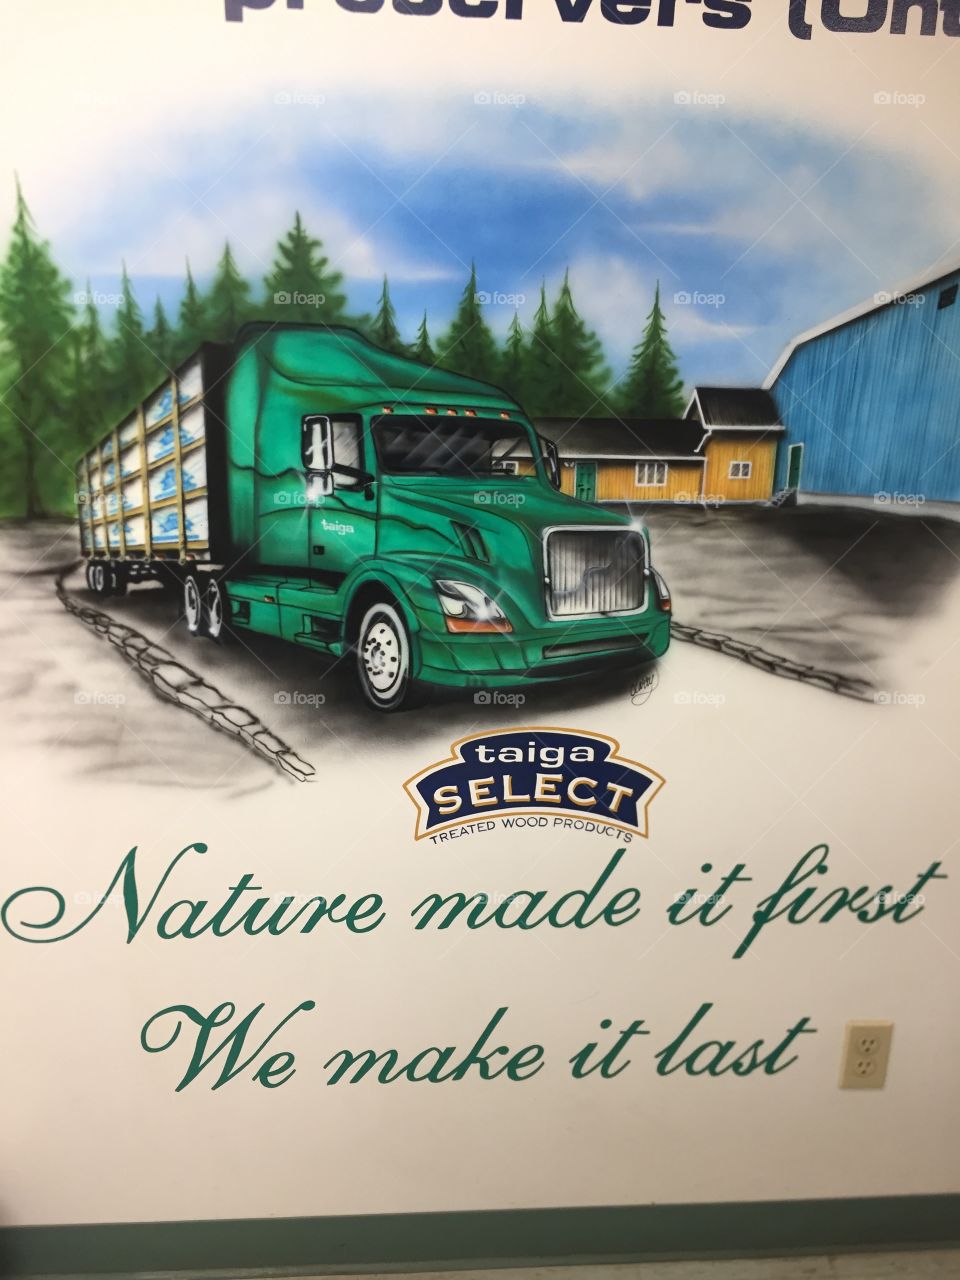 This is our logo at work I think it’s amazing l thought I just share it Taiga is a lumber company 